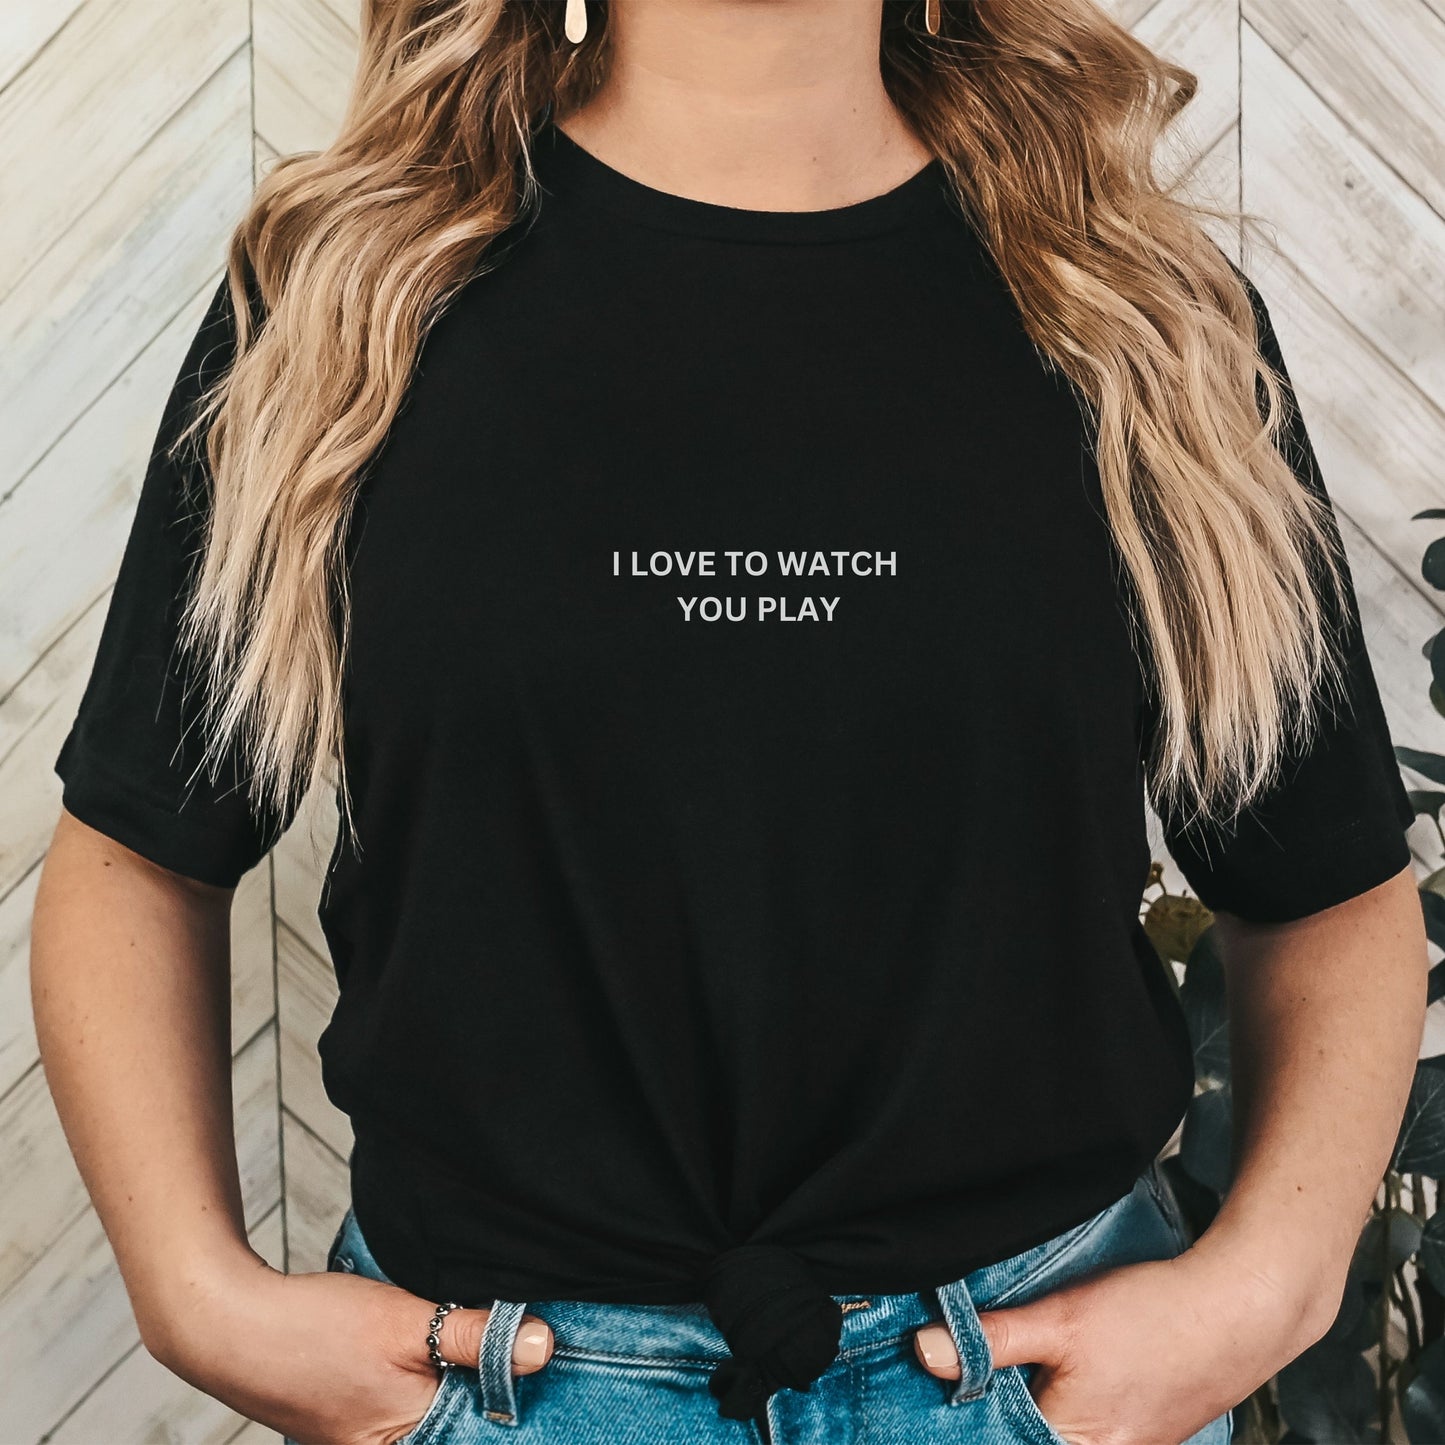 I Love to Watch You Play™ Unisex Tee